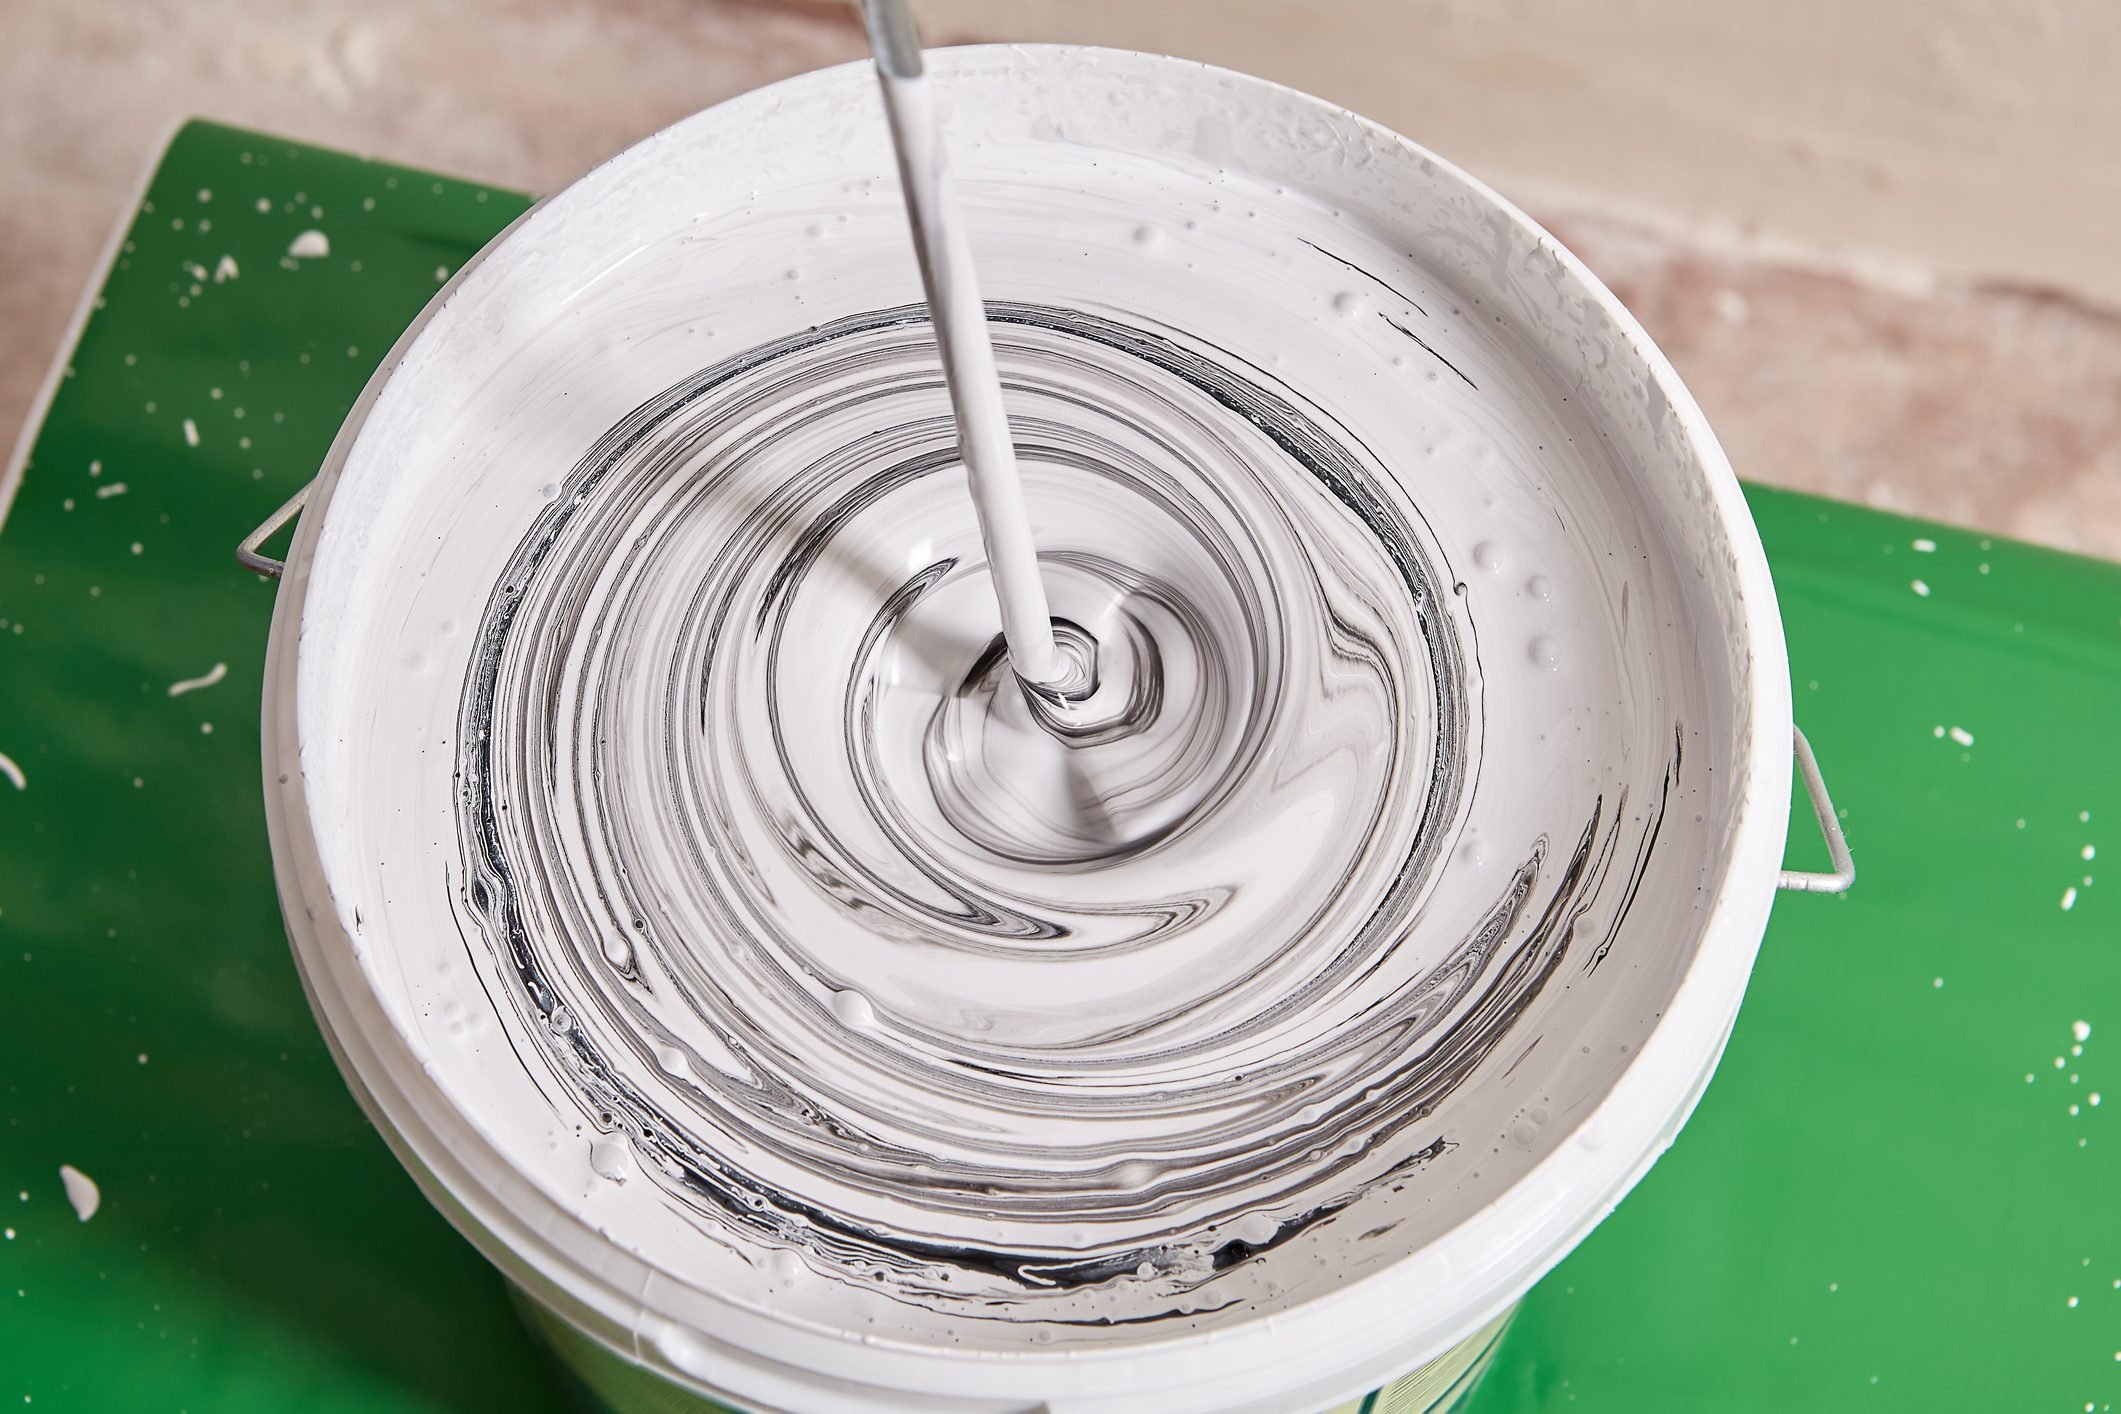 What Is Paint Made Of?